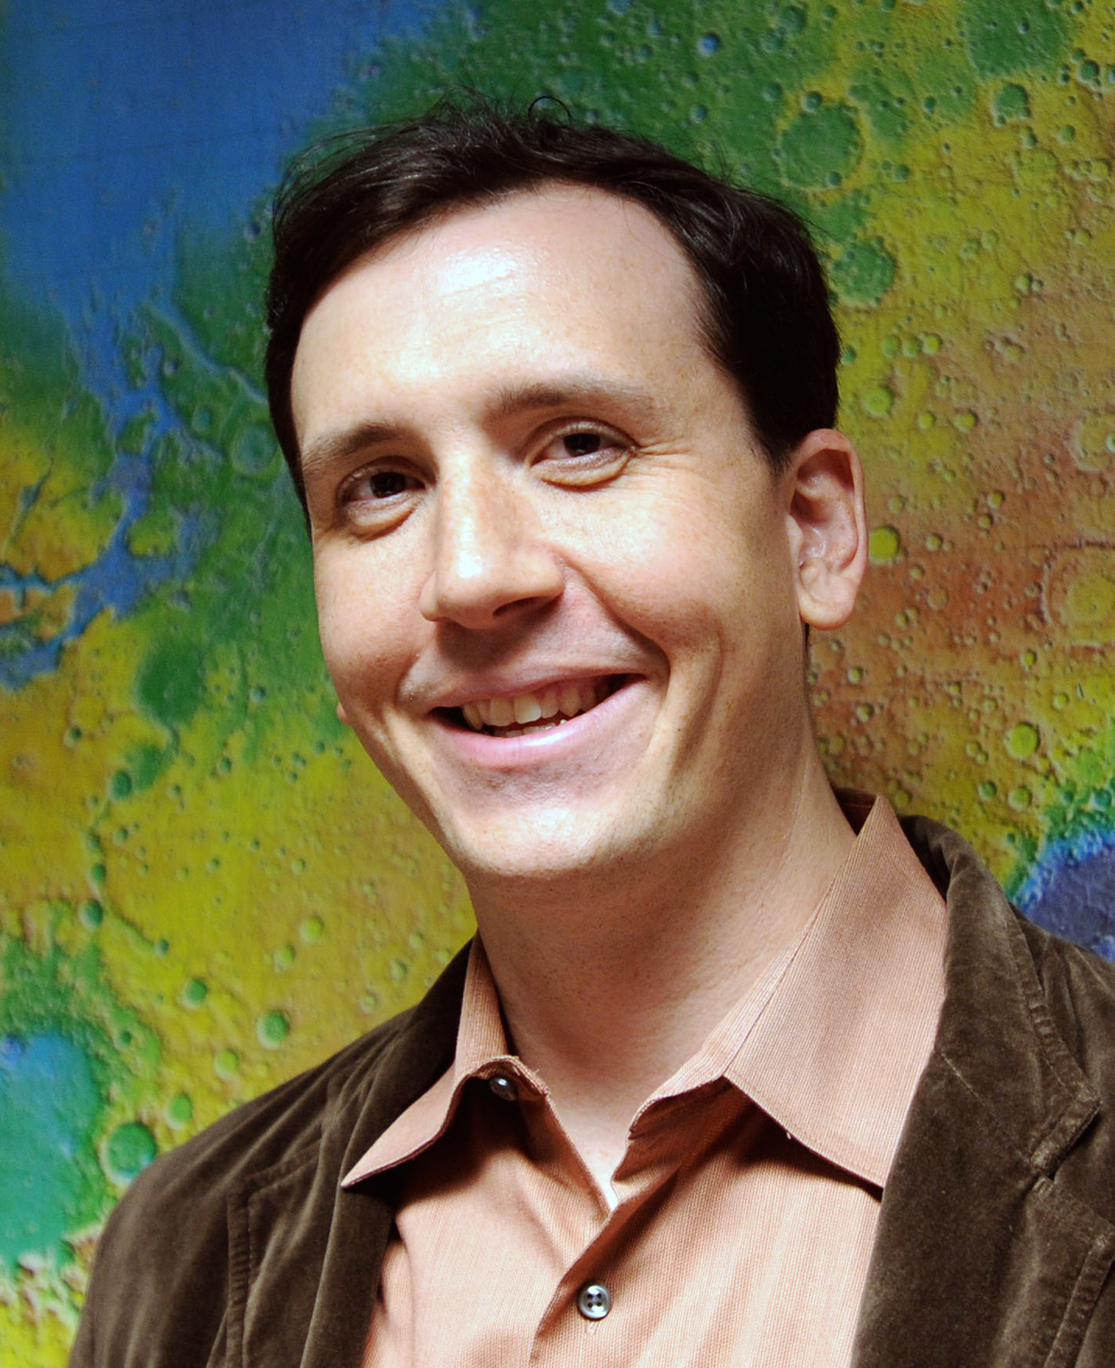 Shawn Domagal-Goldman studies exoplanets and what kinds of worlds would be habitable. 